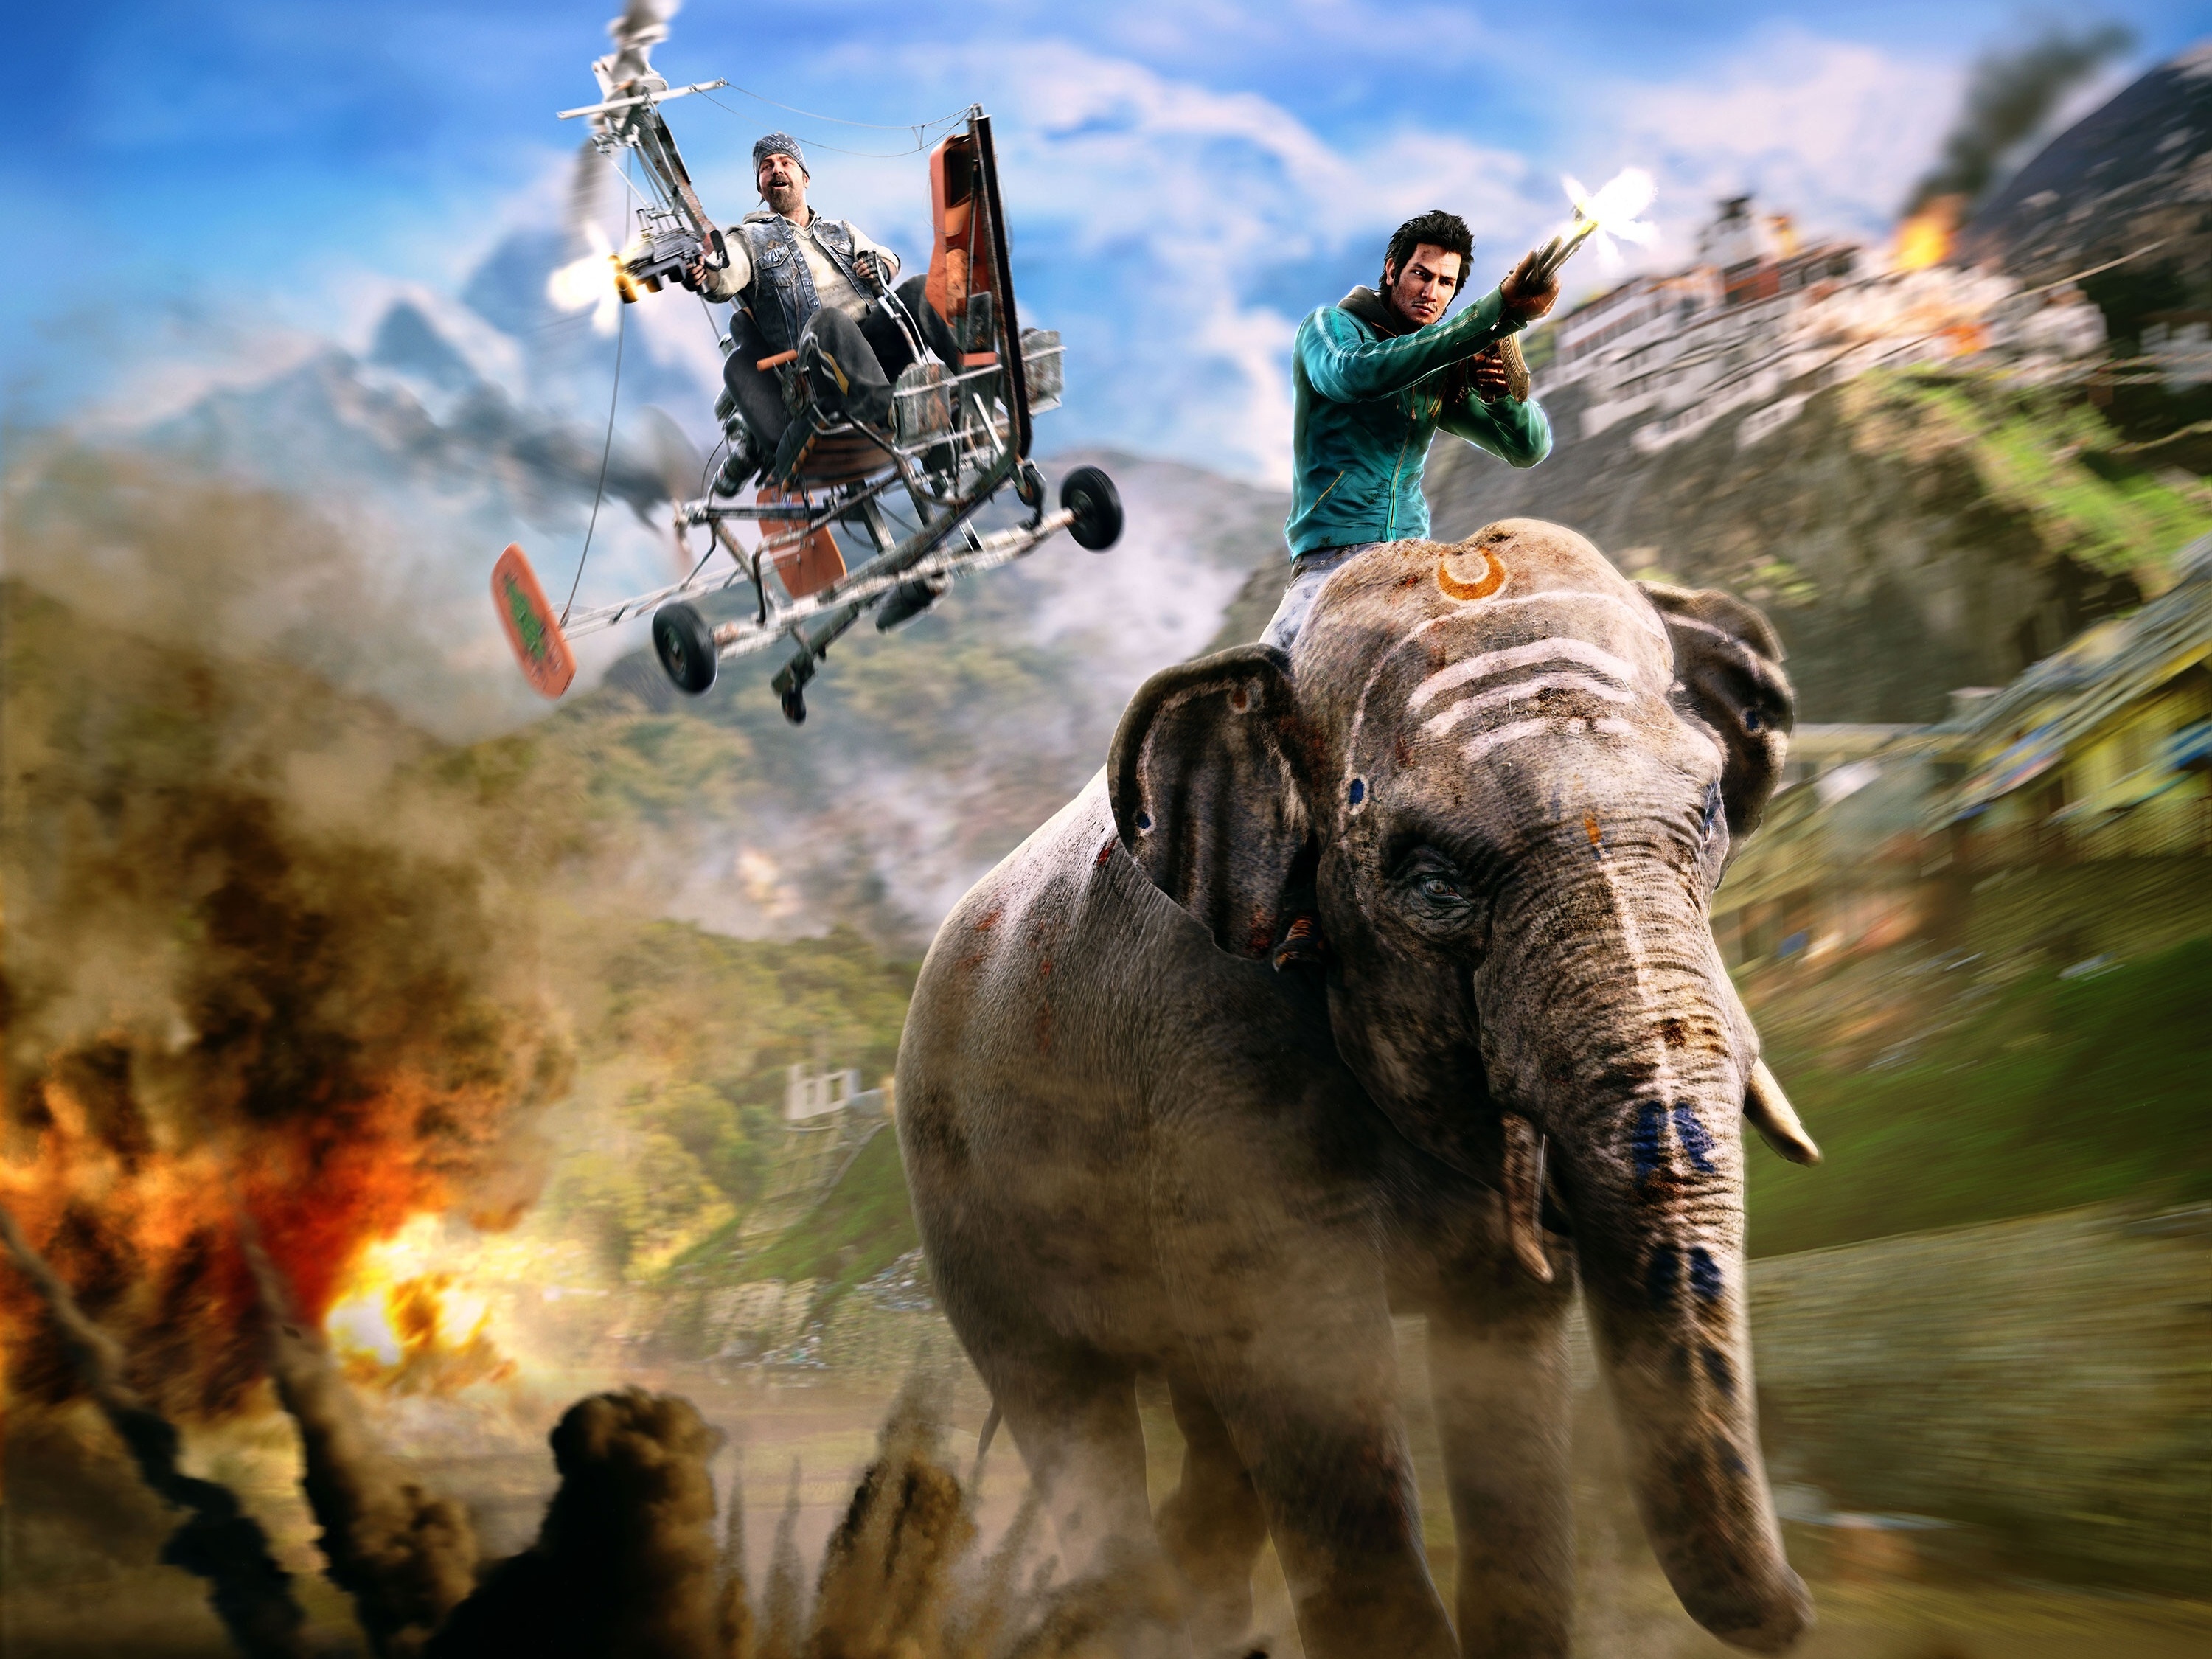 5 Far Cry 4 Wallpapers, Hd Backgrounds, 4k Images, Pictures Page 1